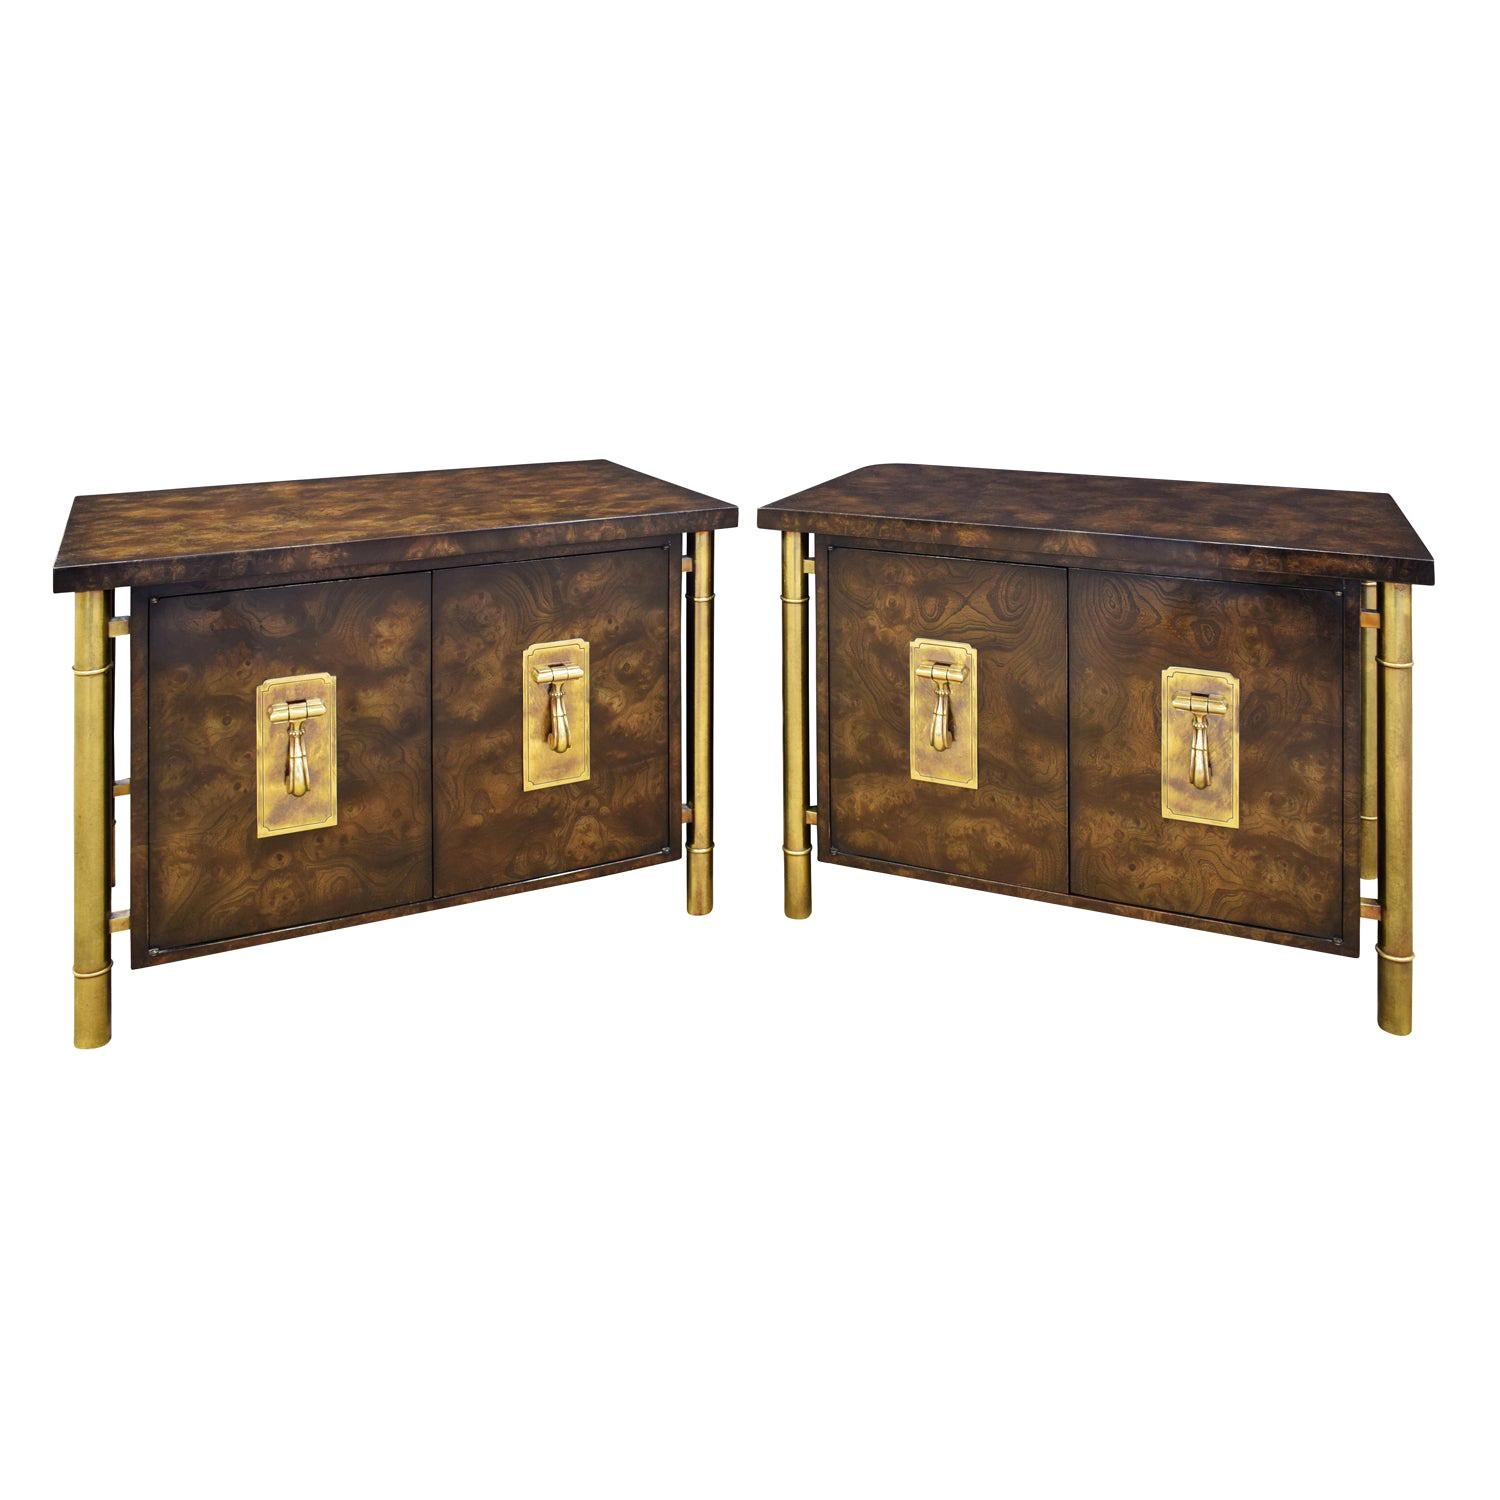 Mastercraft Pair of Luxurious Bedside Tables in Carpathian Elm and Brass, 1960s